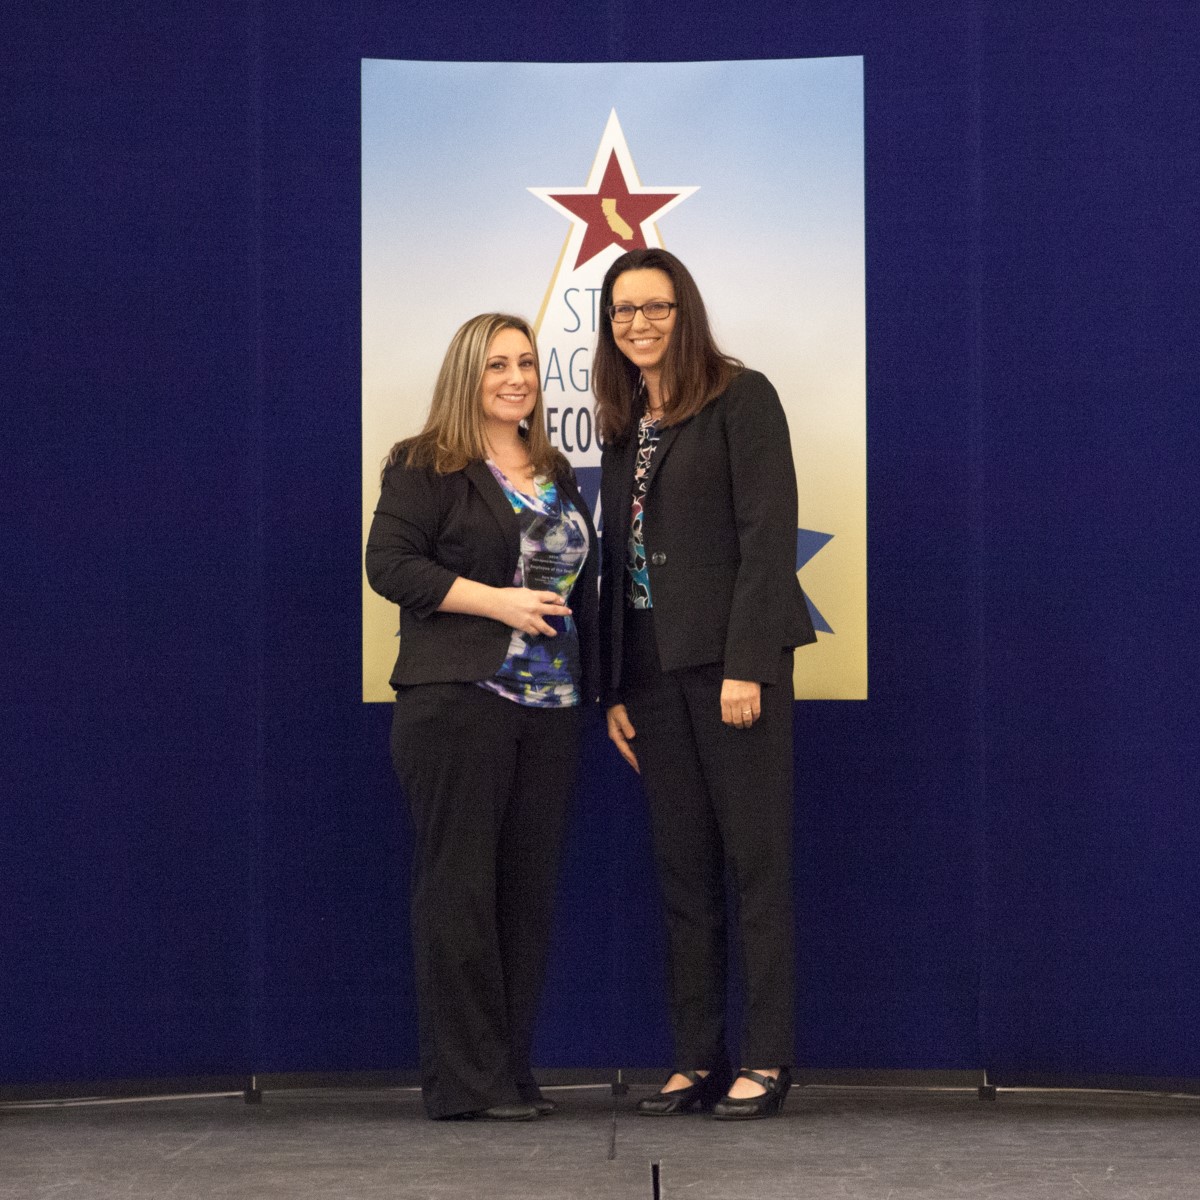 Sarah Ward accepts the employee of the year award, presented by Angela Shell, Deputy Director, Procurement Division, Department of General Services.